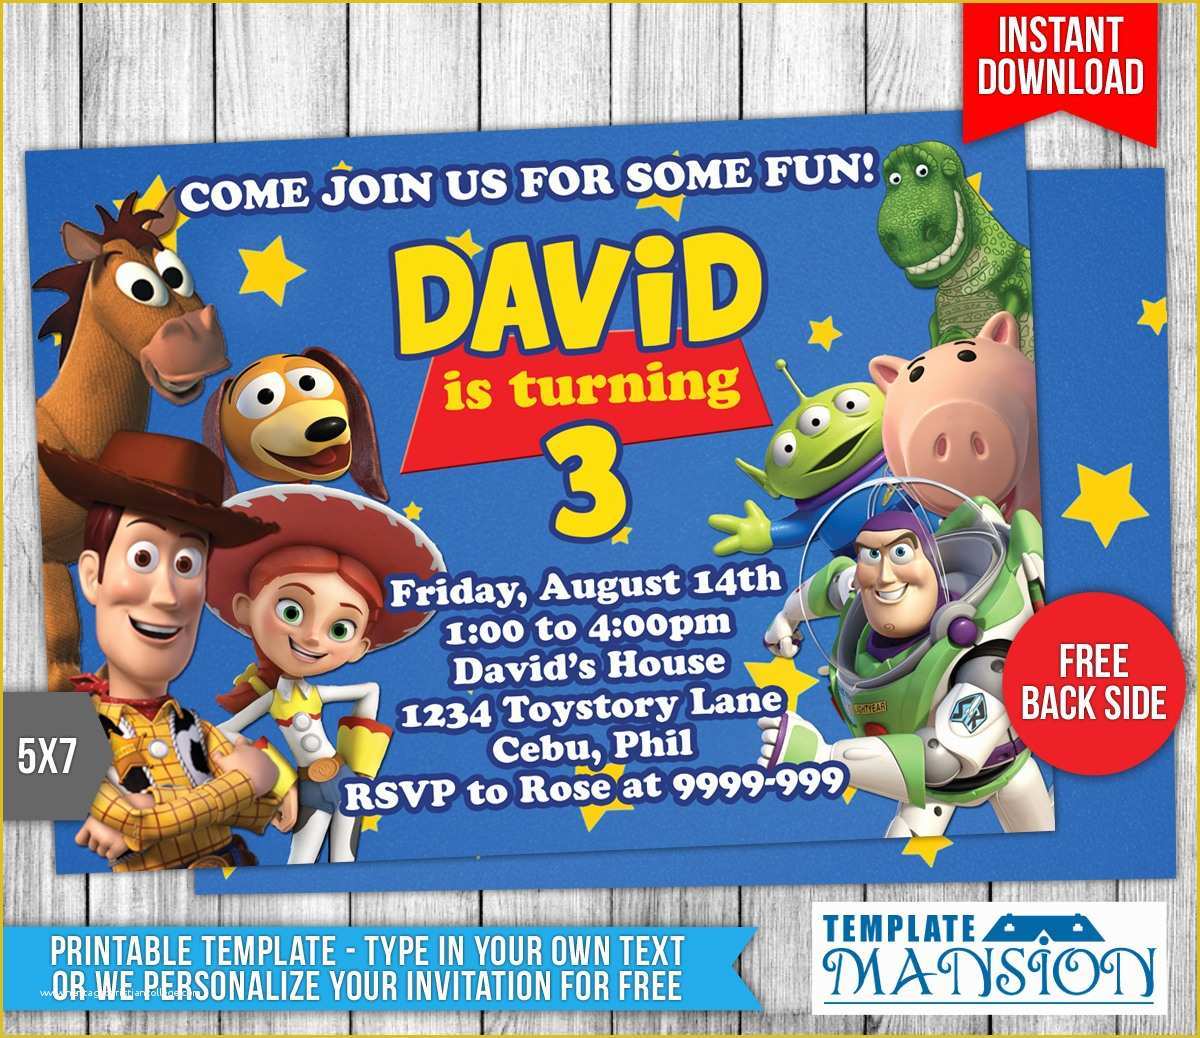 Toy Story Invitation Template Free Download Of toy Story Birthday Invitation 1 by Templatemansion On